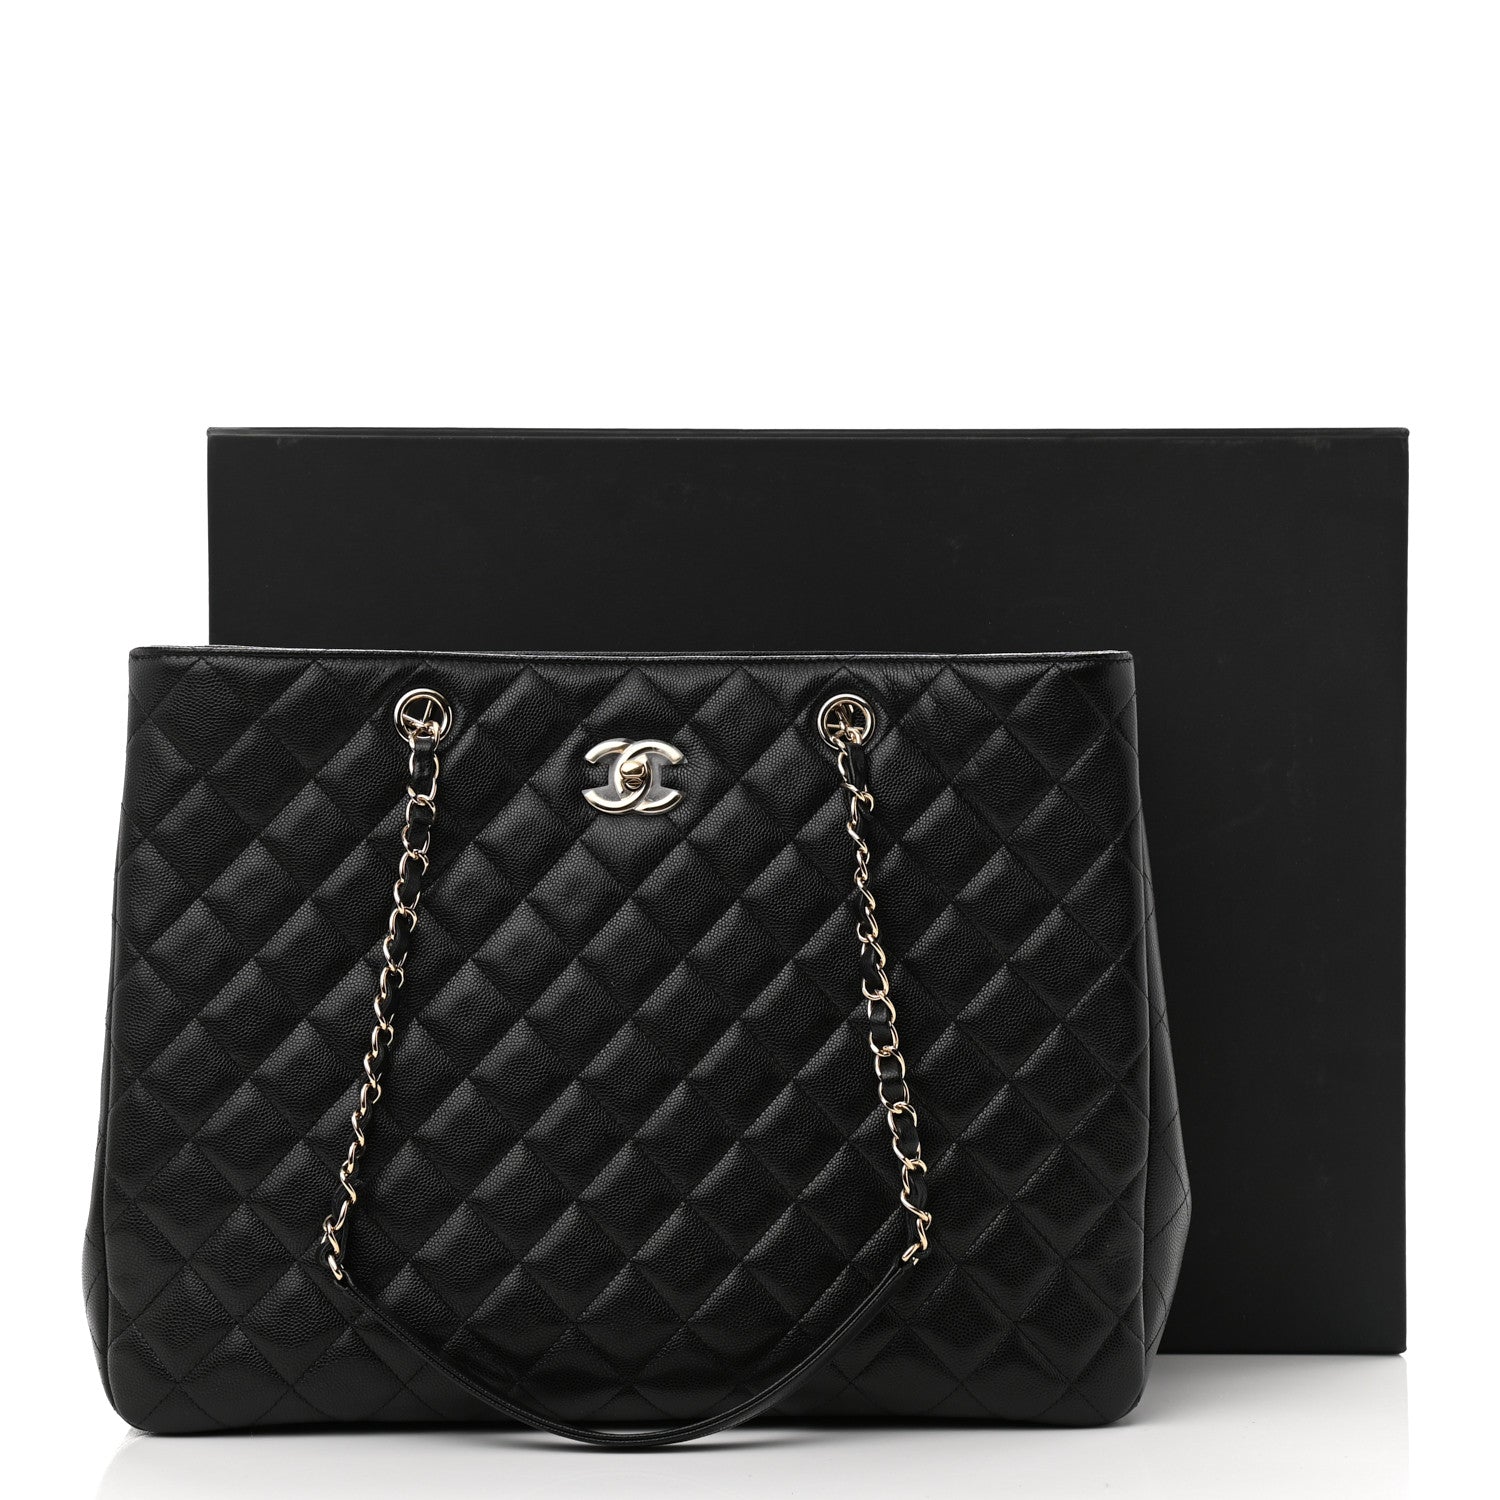 CHANEL, Bags, Chanel Vintage Lambskin Grand Shopping Tote